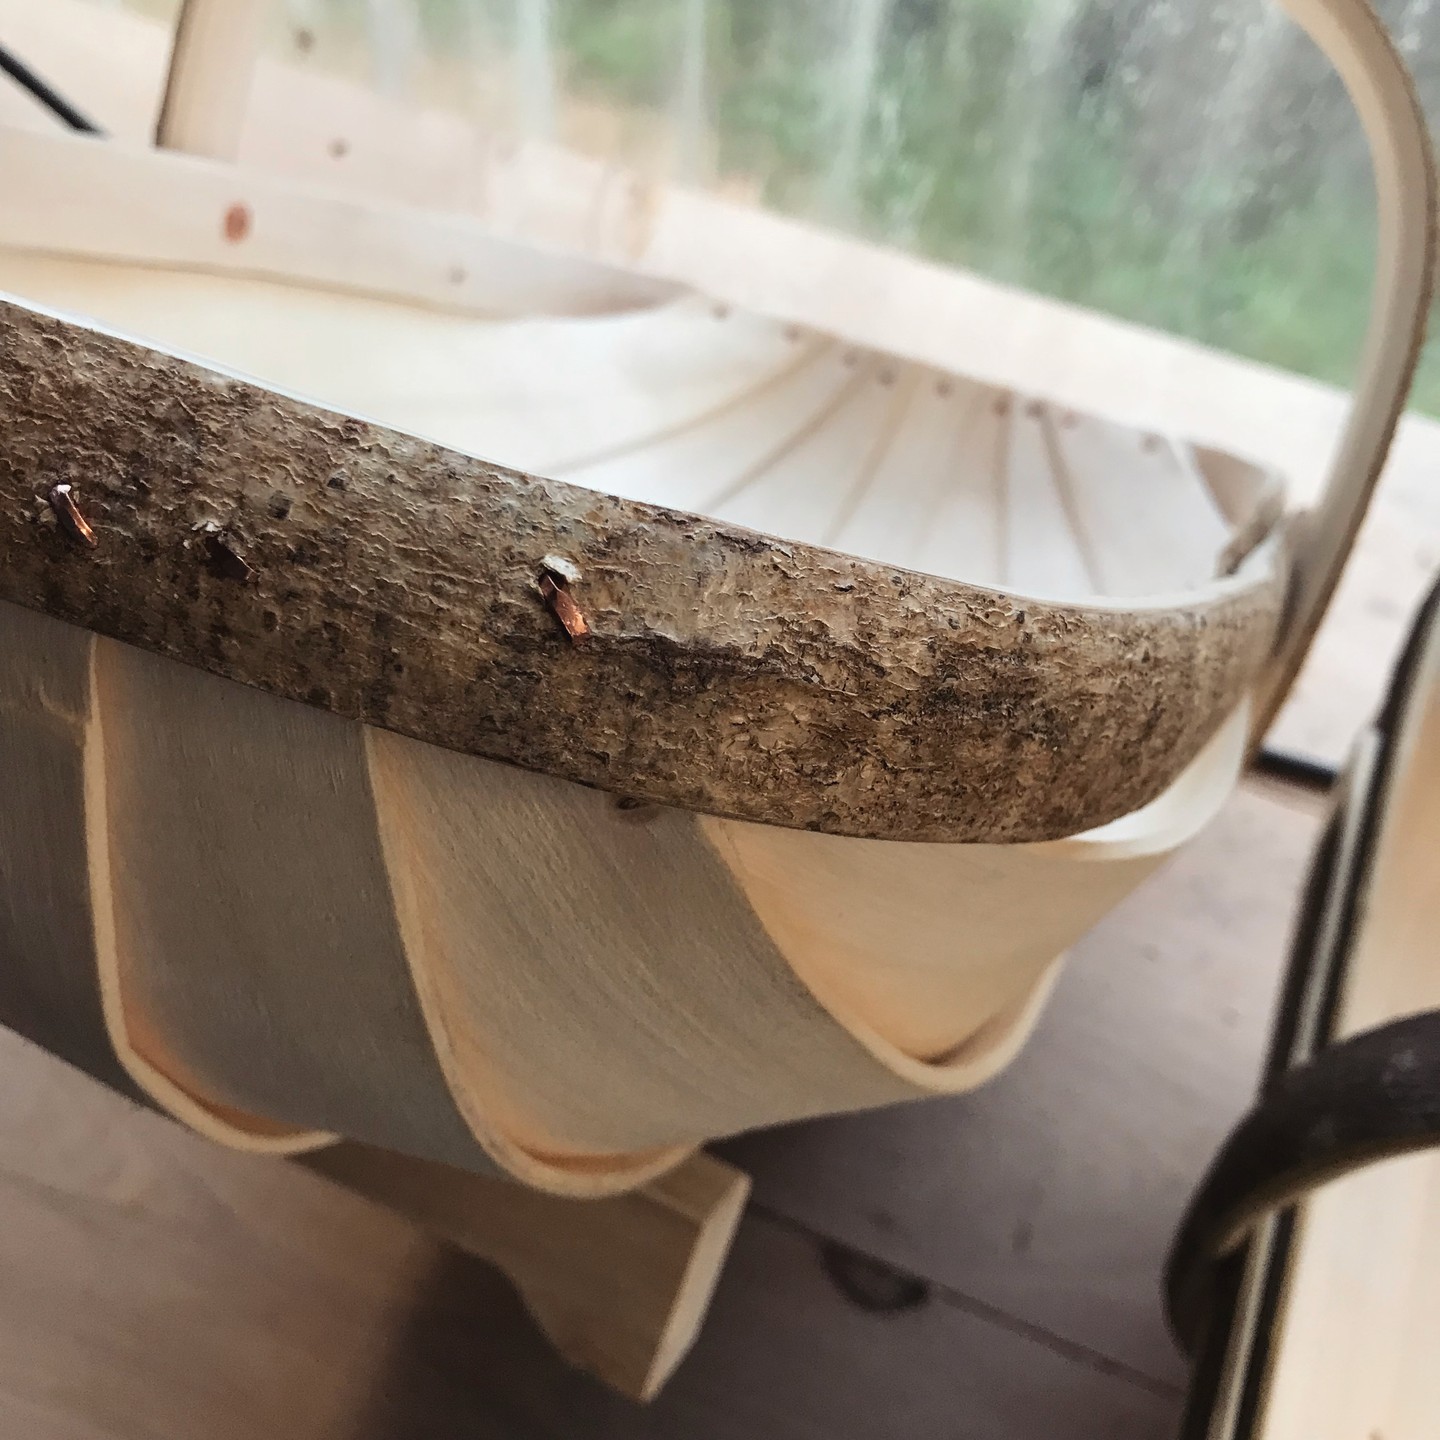 -update: this beautiful trug is now sold-

This is perhaps slightly unorthodox but when I last went out to the workshop there was this lovely trug there. It's not often that there are rims and handles this pale - perhaps only one or two a season. If this is the bark colour you like here is your chance! Send us an email 😊

#trug #sussextrug #gardenbasket #gardentrug #harvestbasket #gardentools #trugmaking #trugworkshop #hazel #willow #aspenpoplar #sustainablyharvested #handmadeinnz #handmadegifts #handmadeingoldenbay #supportlocalnz #buynzmade #shoplocalnz #sustainablysourcedtimber #locallysourced #sustainablymade #chemicalfree #untreatedwood #goldenbay #goldenbaynz #anatoki